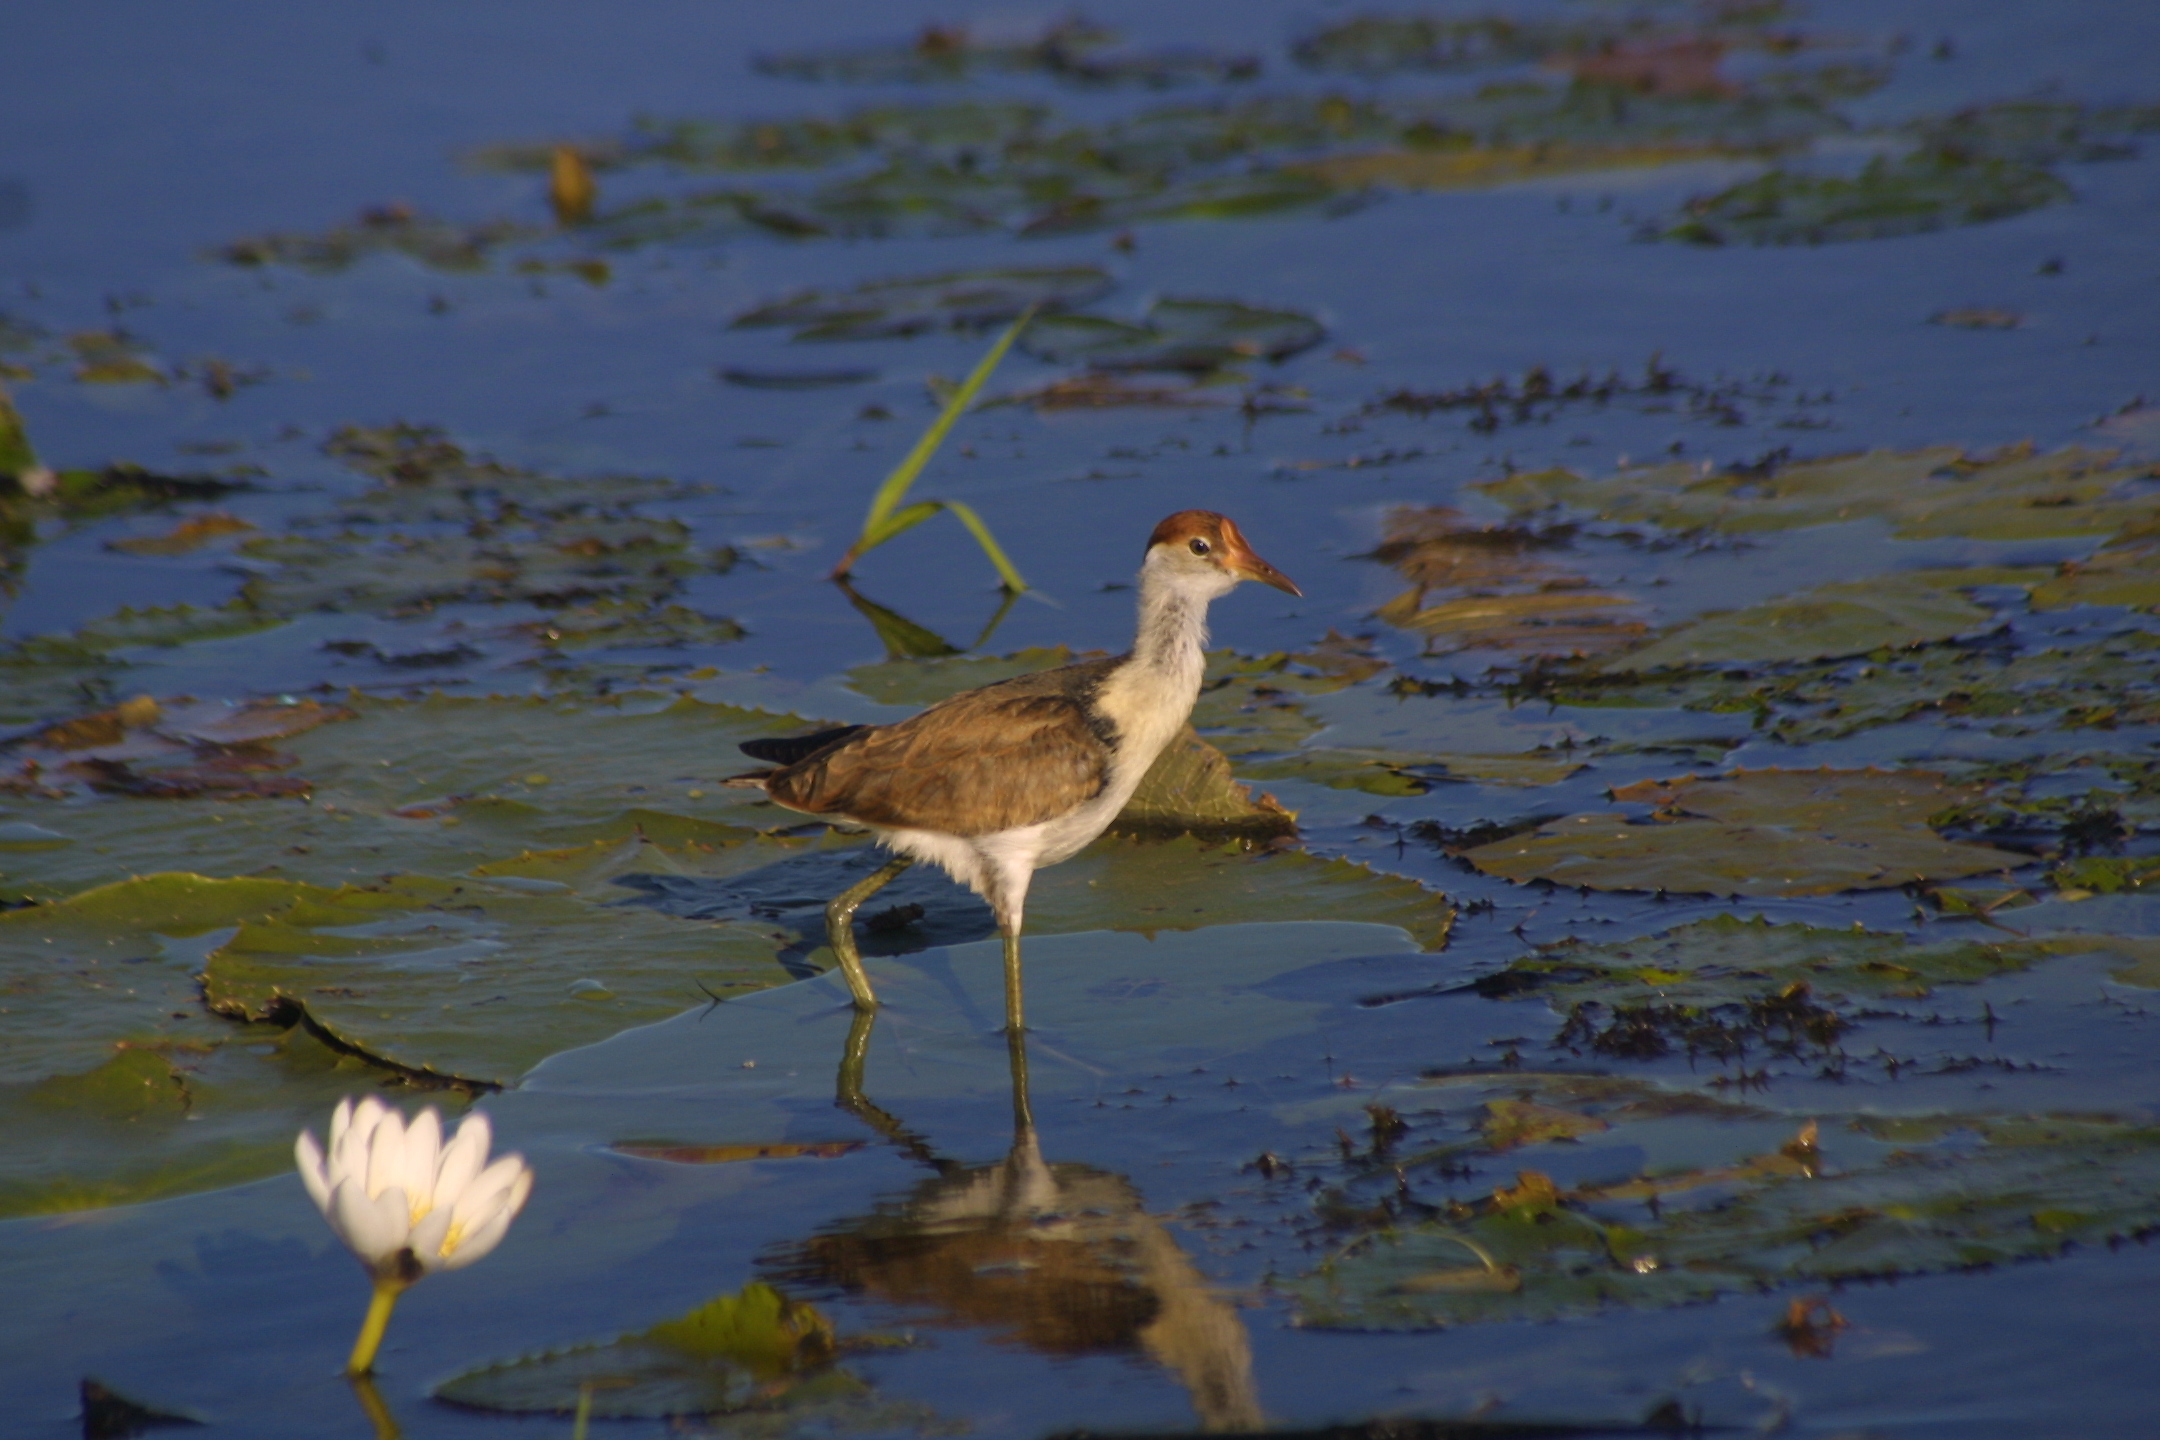 a bird standing in the water with its legs crossed